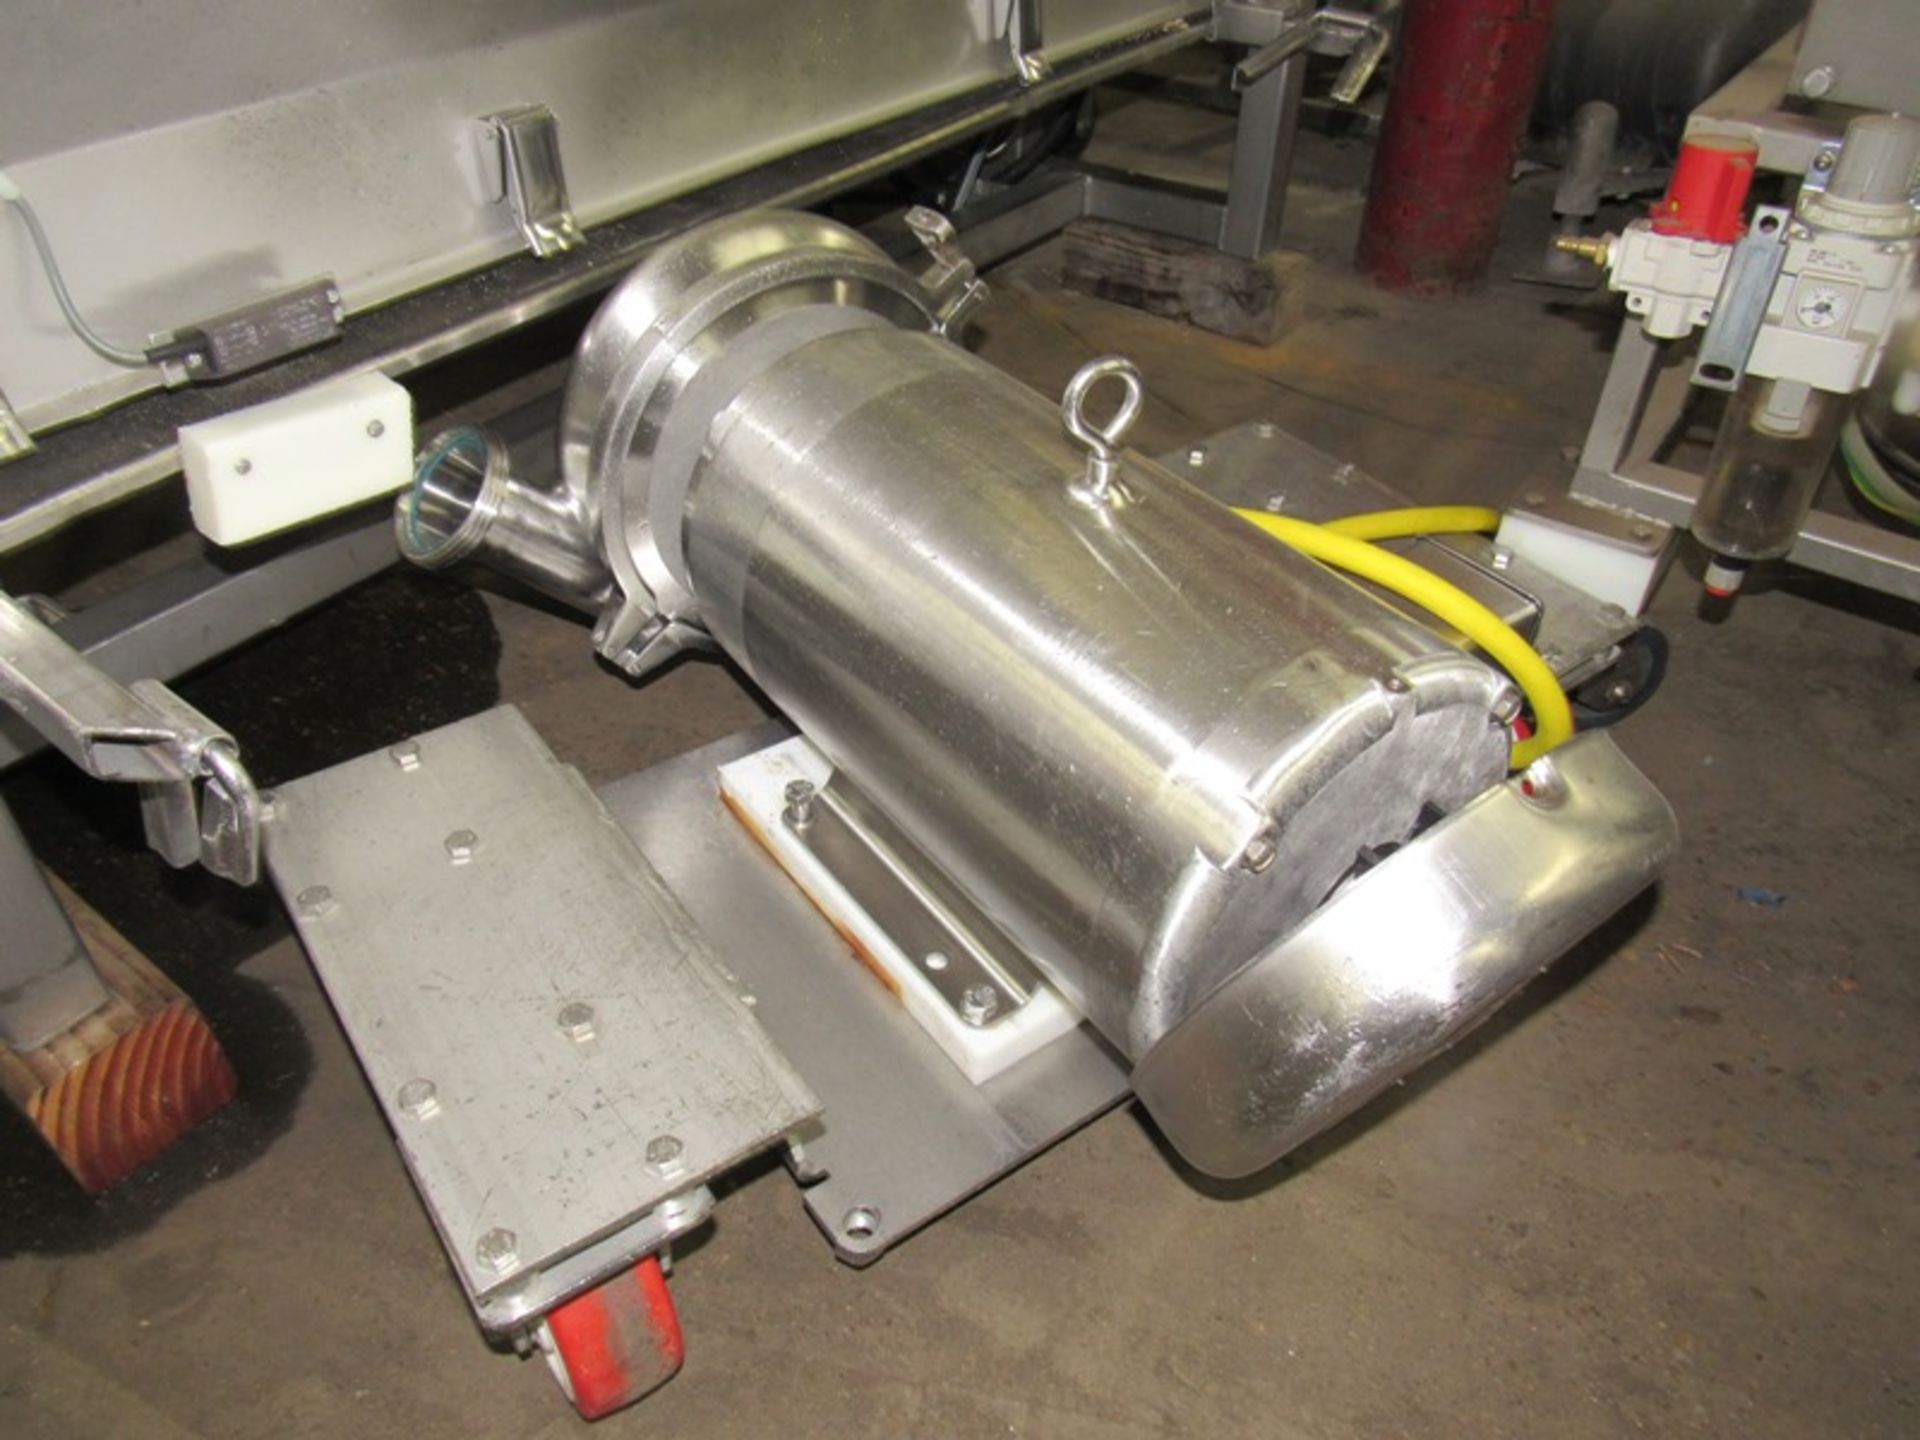 Schroeder Mdl. IMAX630 Wolftec Injector, double head, 273 needles head, 24" W X 10' L intralox - Image 32 of 32